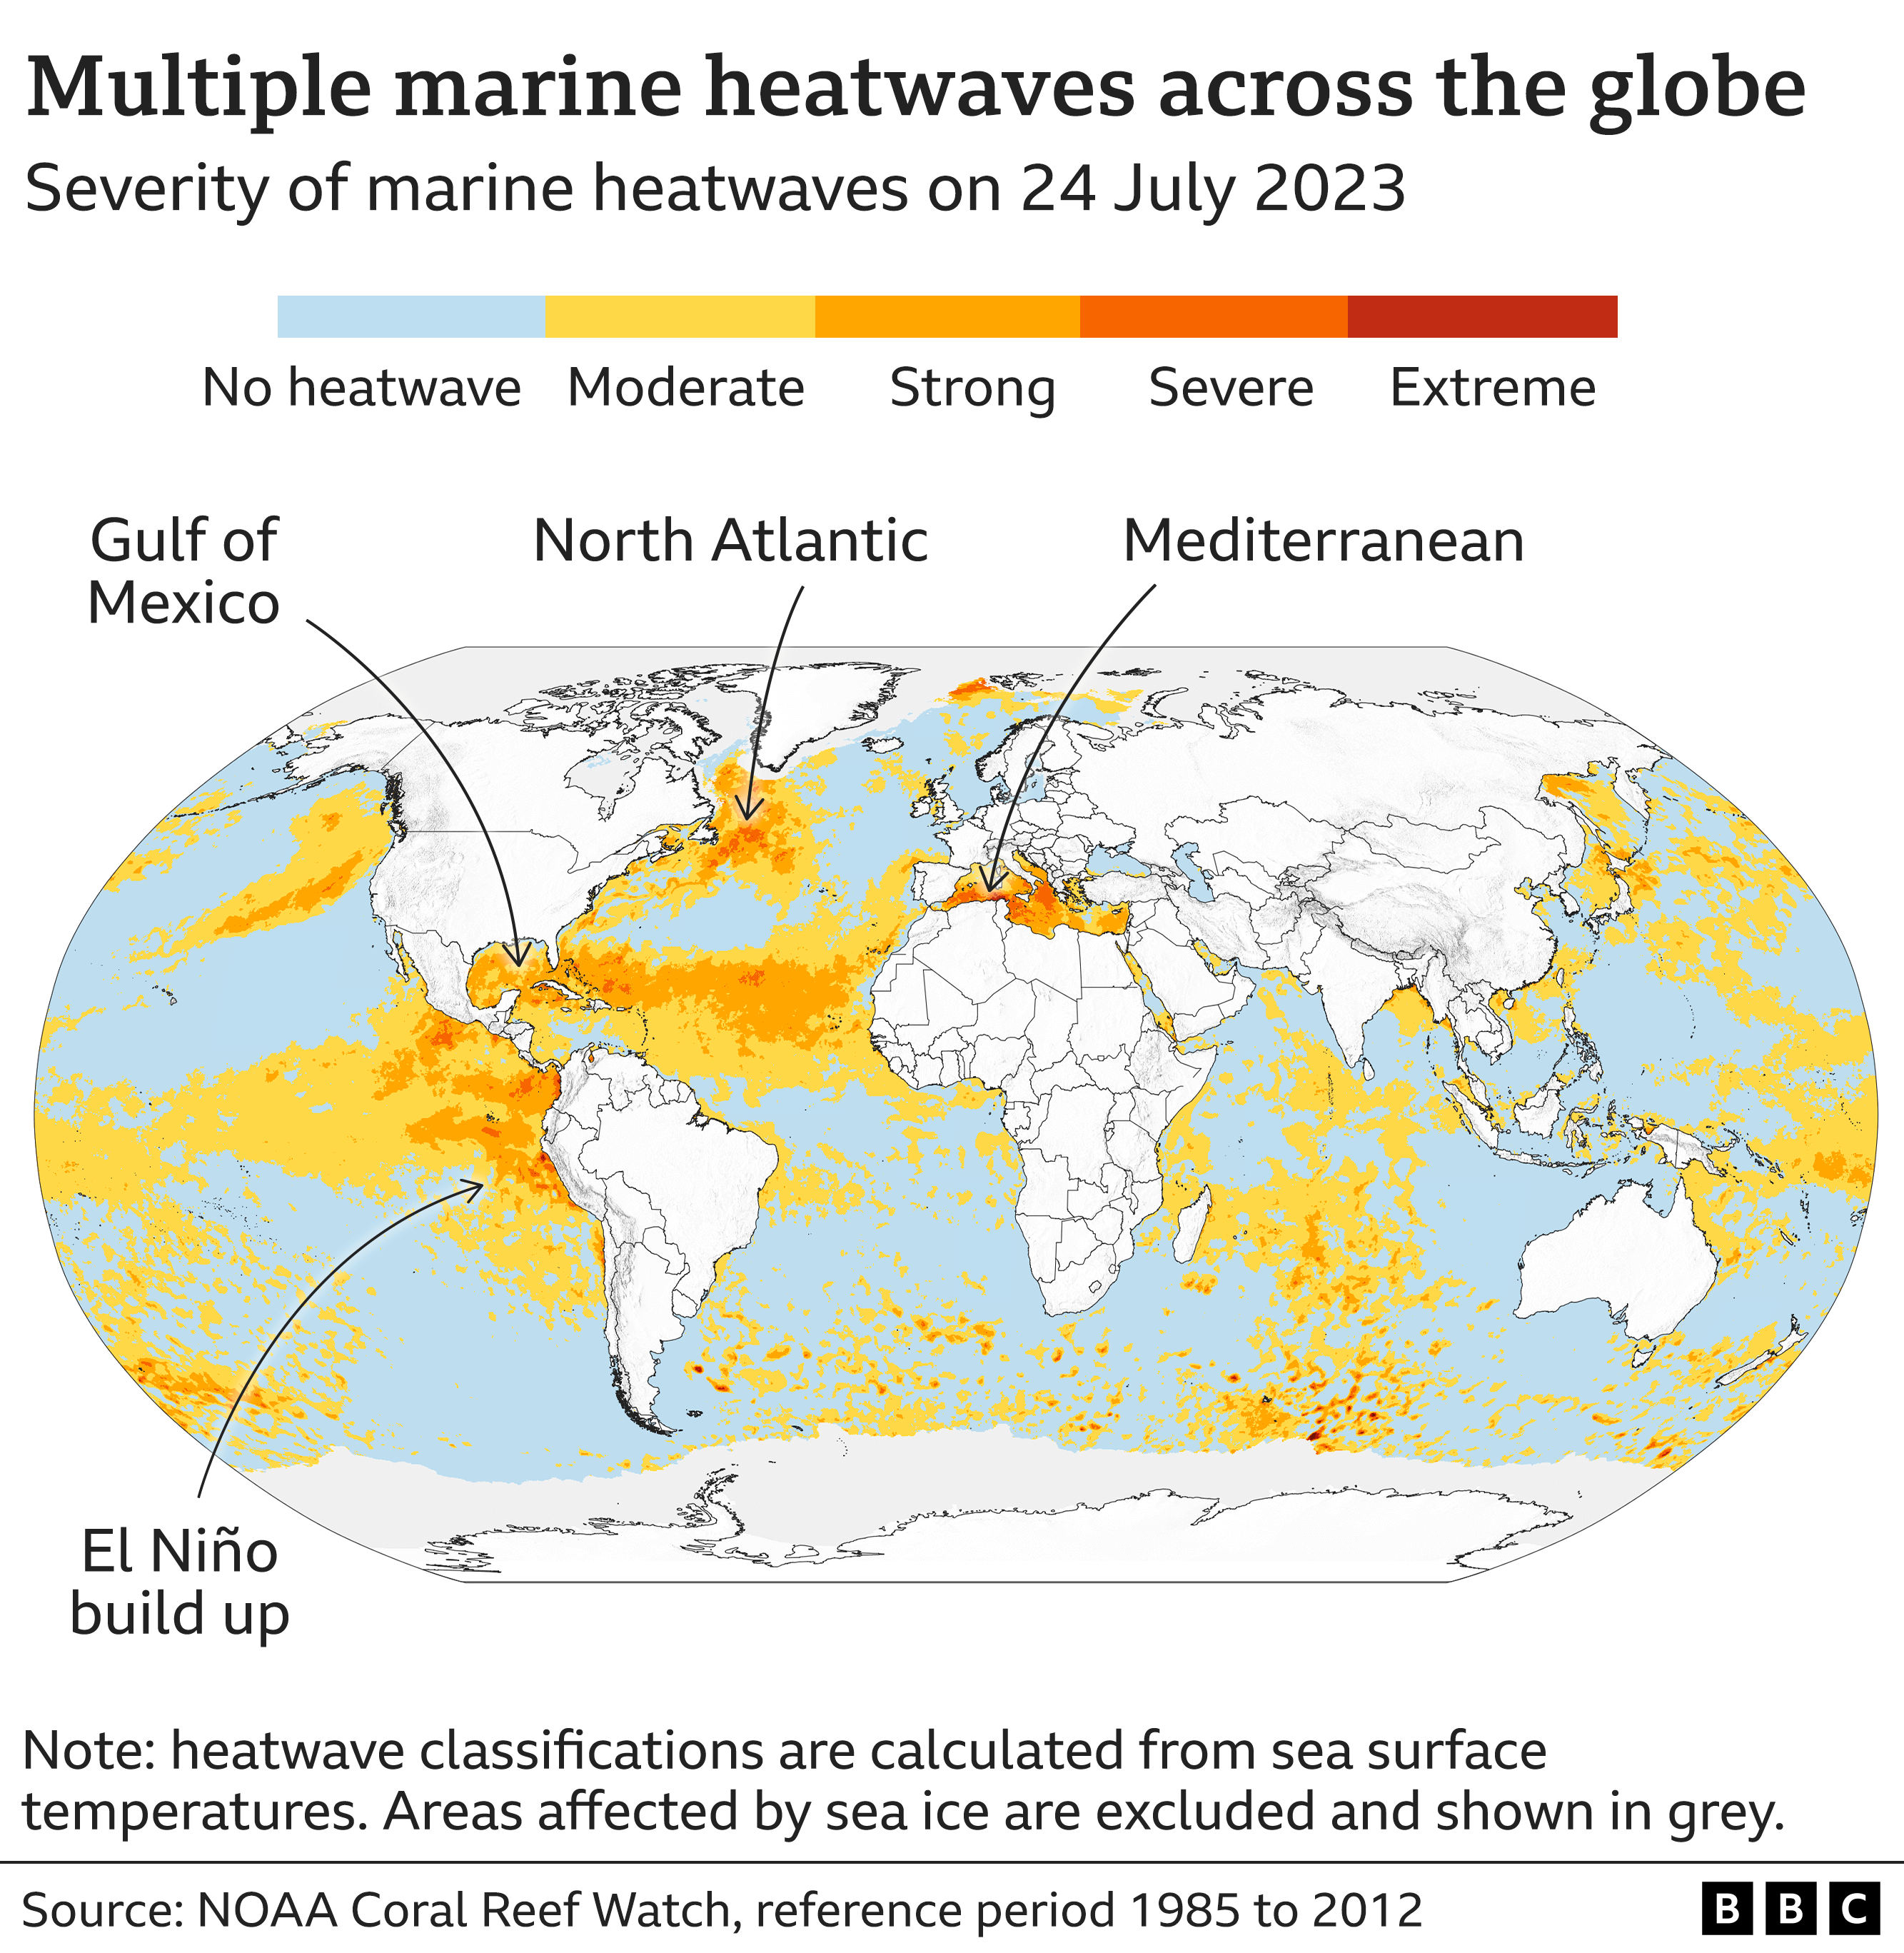 World map from 24 July 2023 showing the severity of marine heatwaves. There are five categories ranging from no heatwave to severe. Strong heatwaves can be seen in the Gulf of Mexico, North Atlantic and Mediterranean. The ongoing buildup of the El Nino phenomenon in the Pacific is also visible